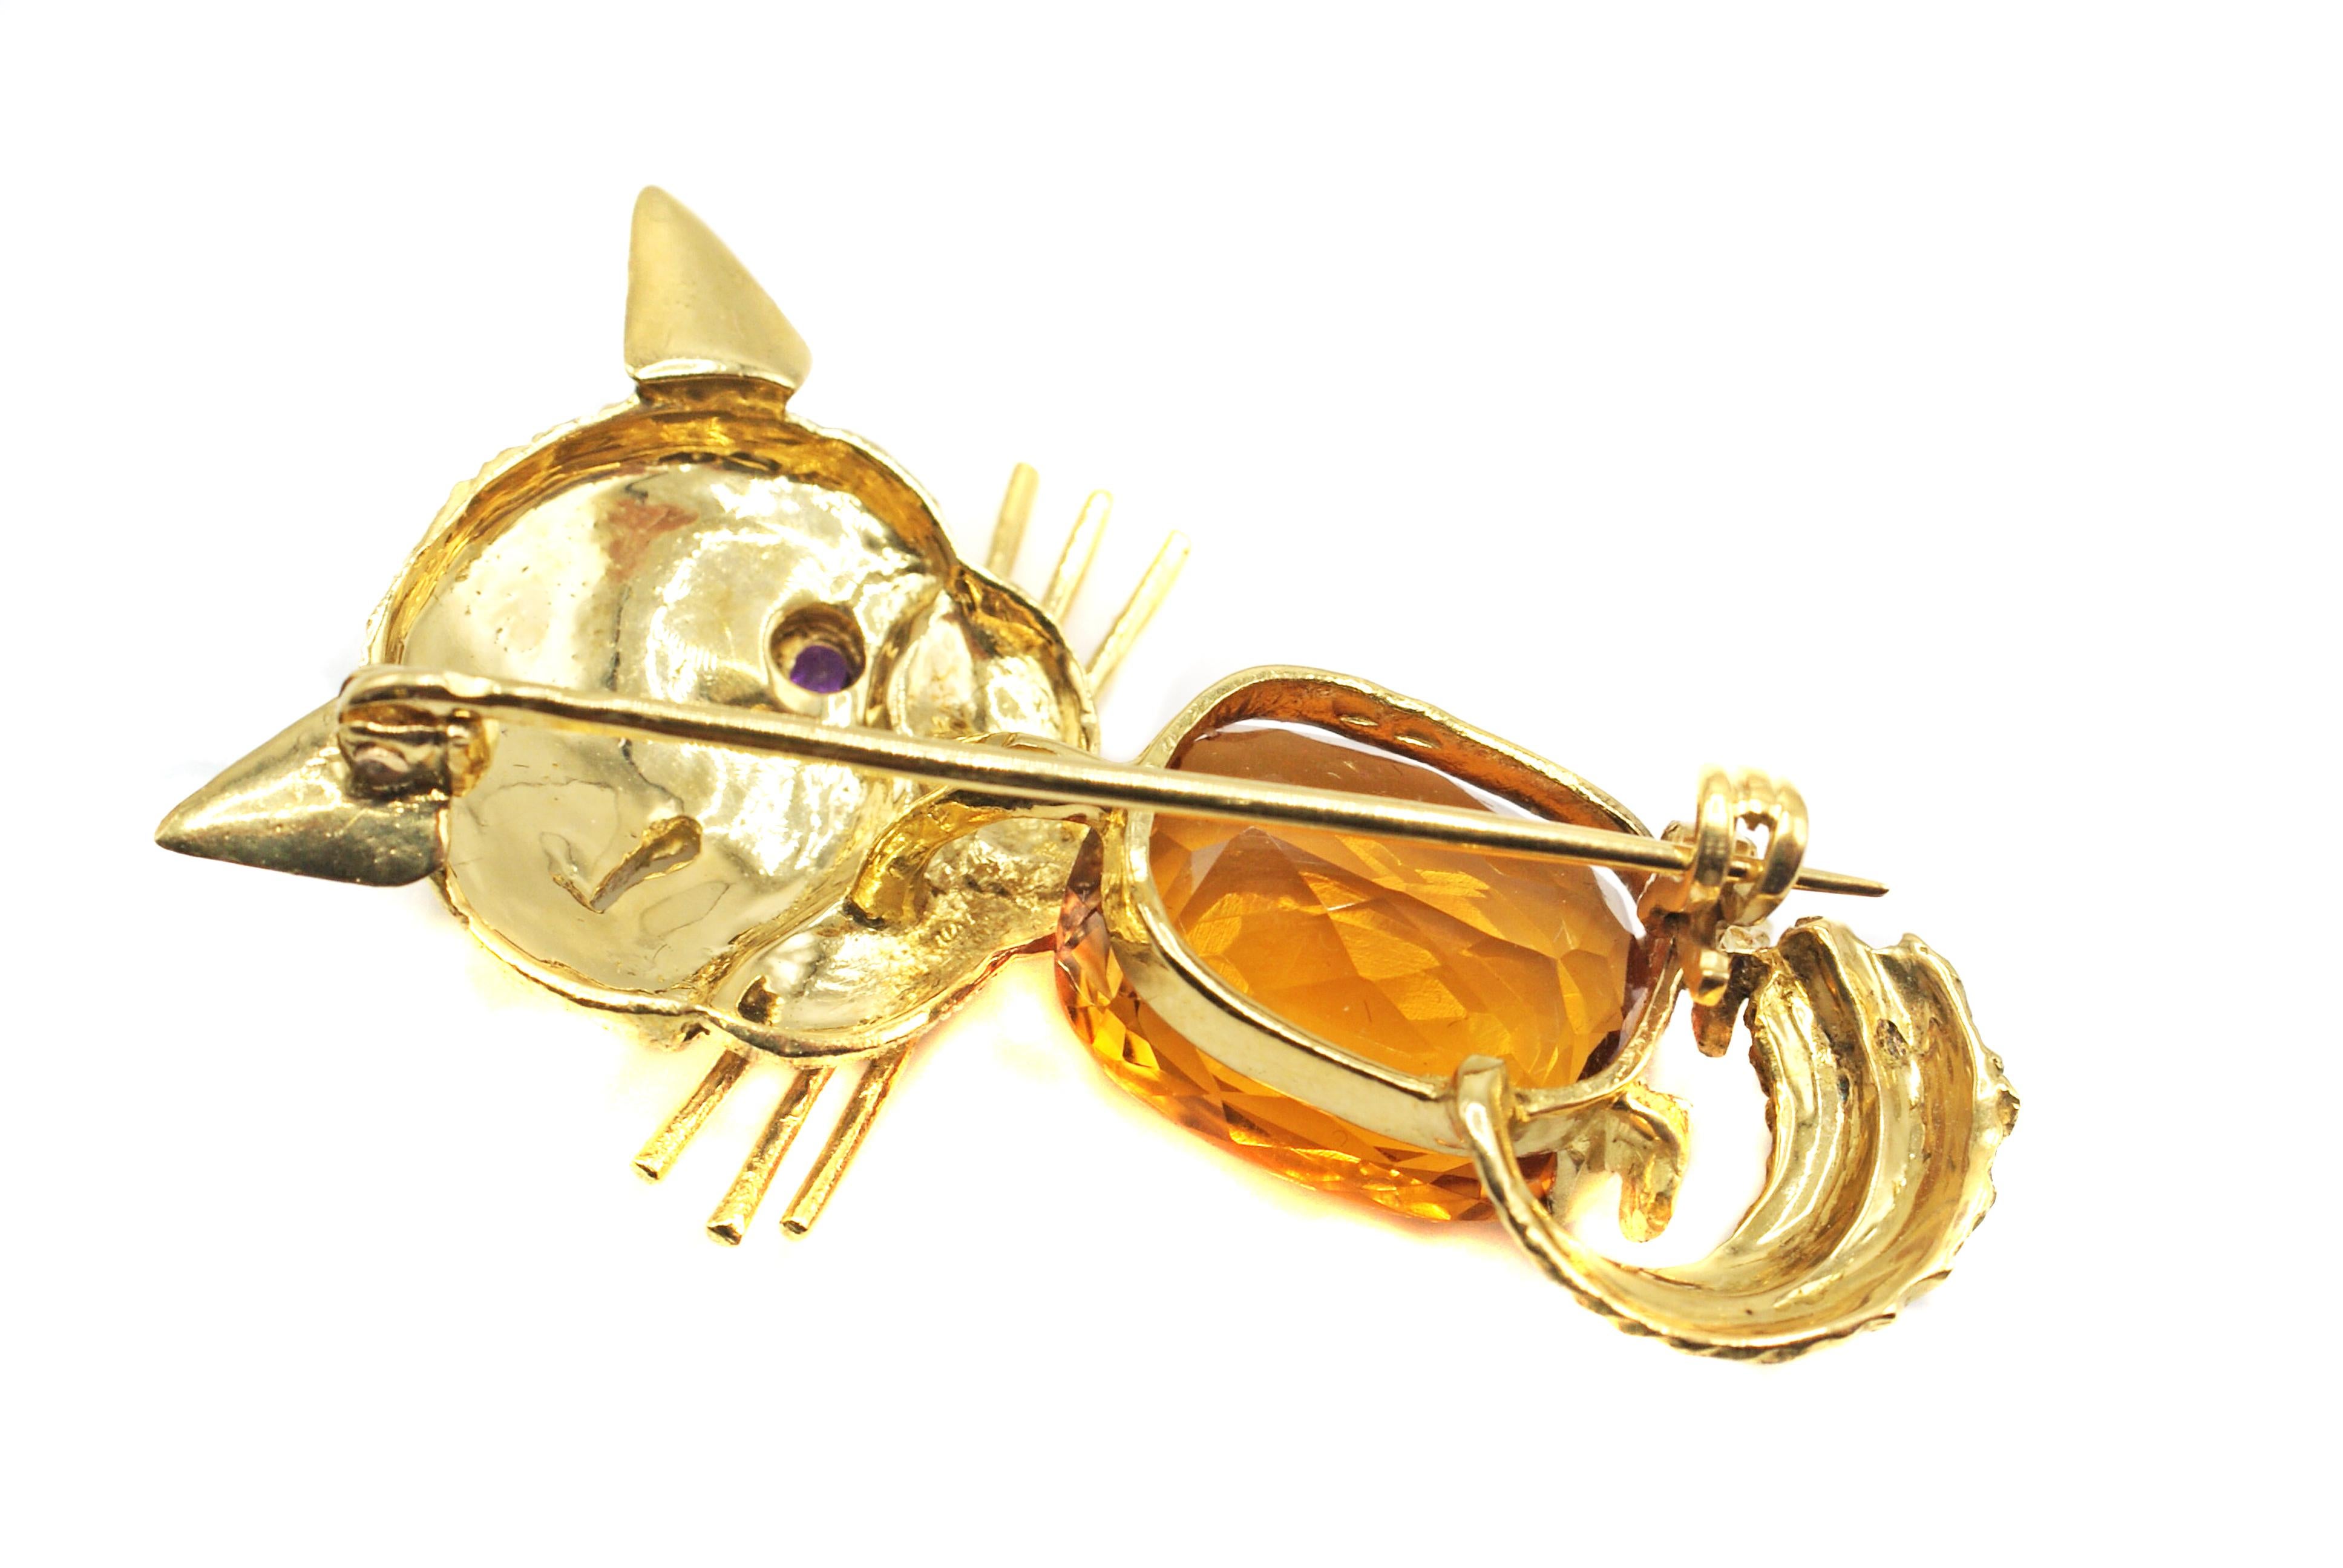 The bright orange citrine center of this brooch is approximately 7 carats. The beautiful cut of this oval cushion bring this gem to life and represents the body of this delightful whimsical cat brooch. The textured and beautifully engraved face of